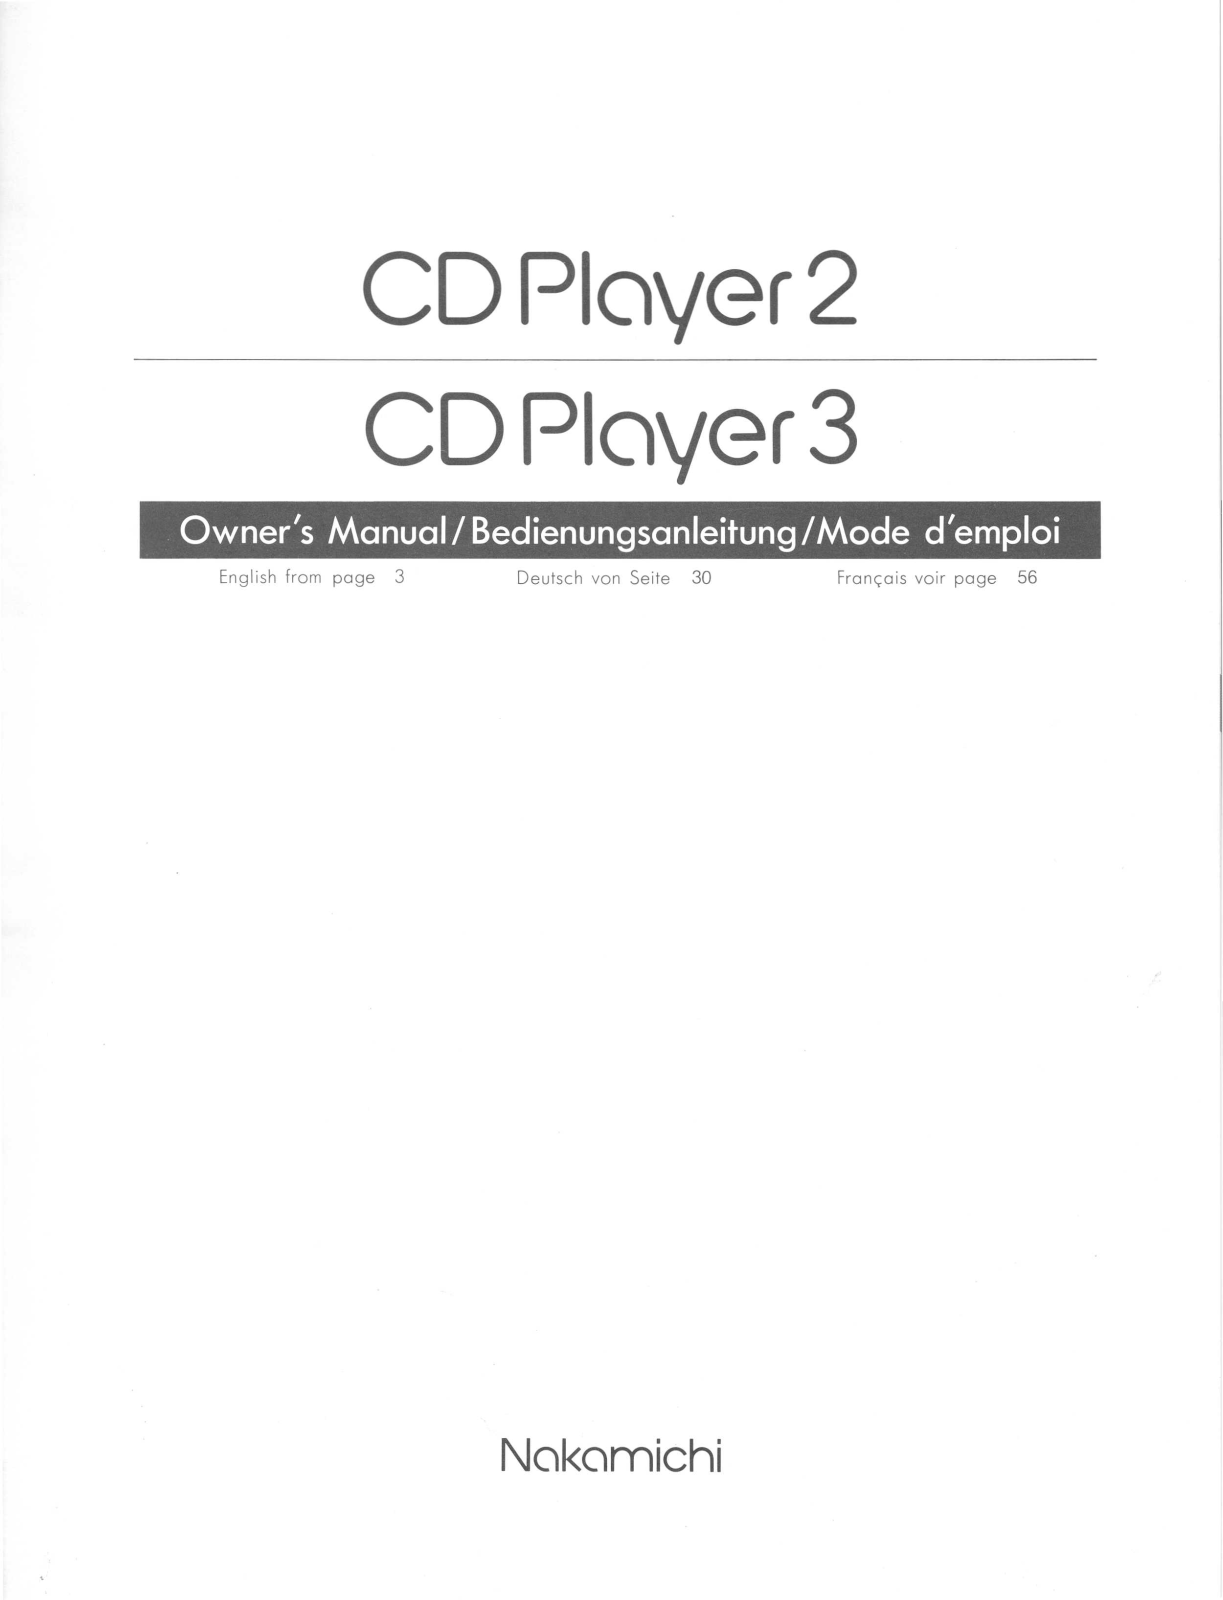 Nakamichi CD player 2, CD Player 3 Owners manual